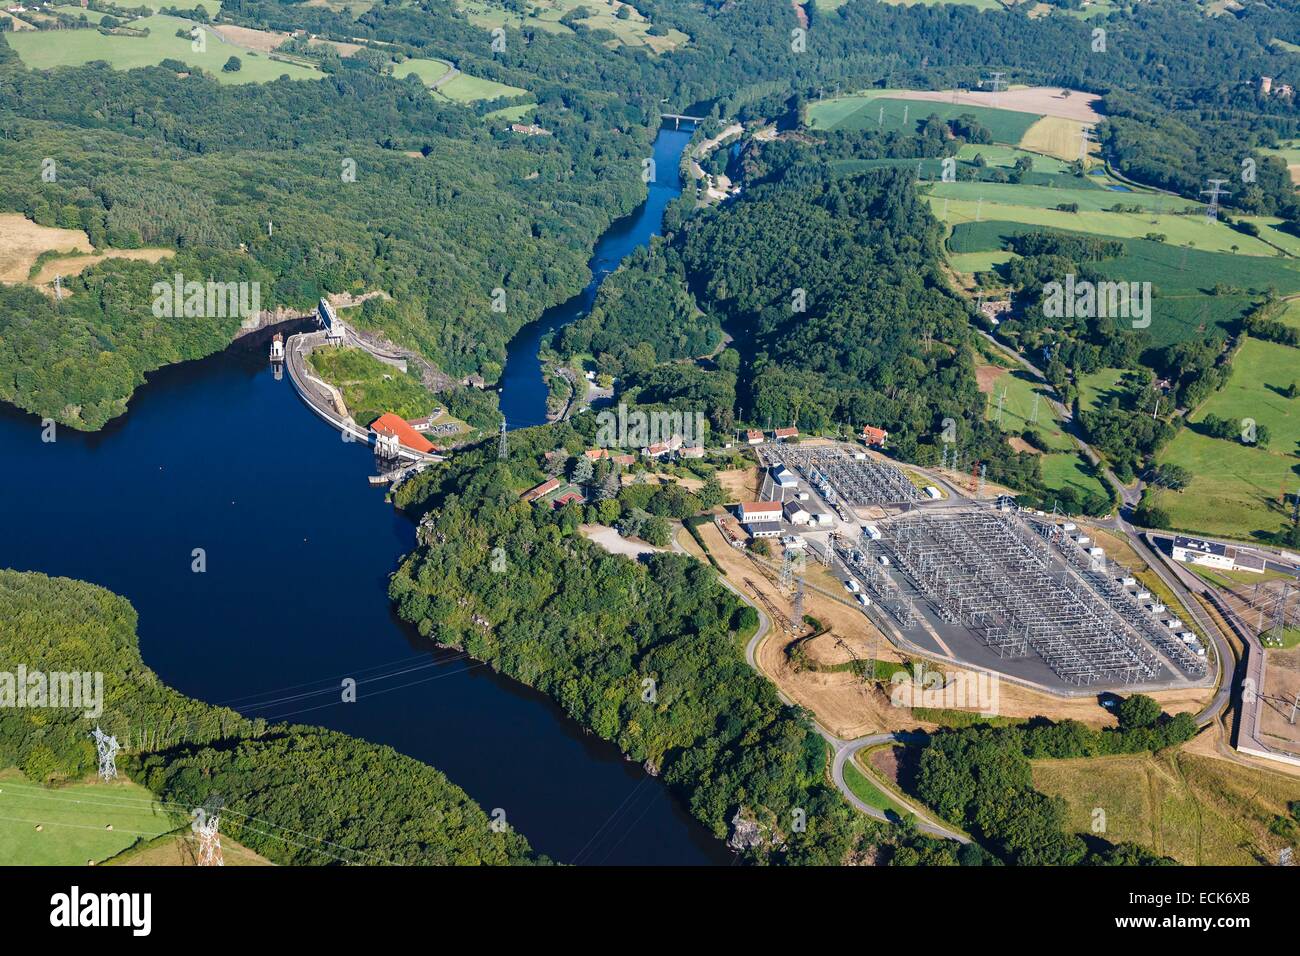 France, Indre, Cuzion, Eguzon dam and power station (aerial view) Stock Photo